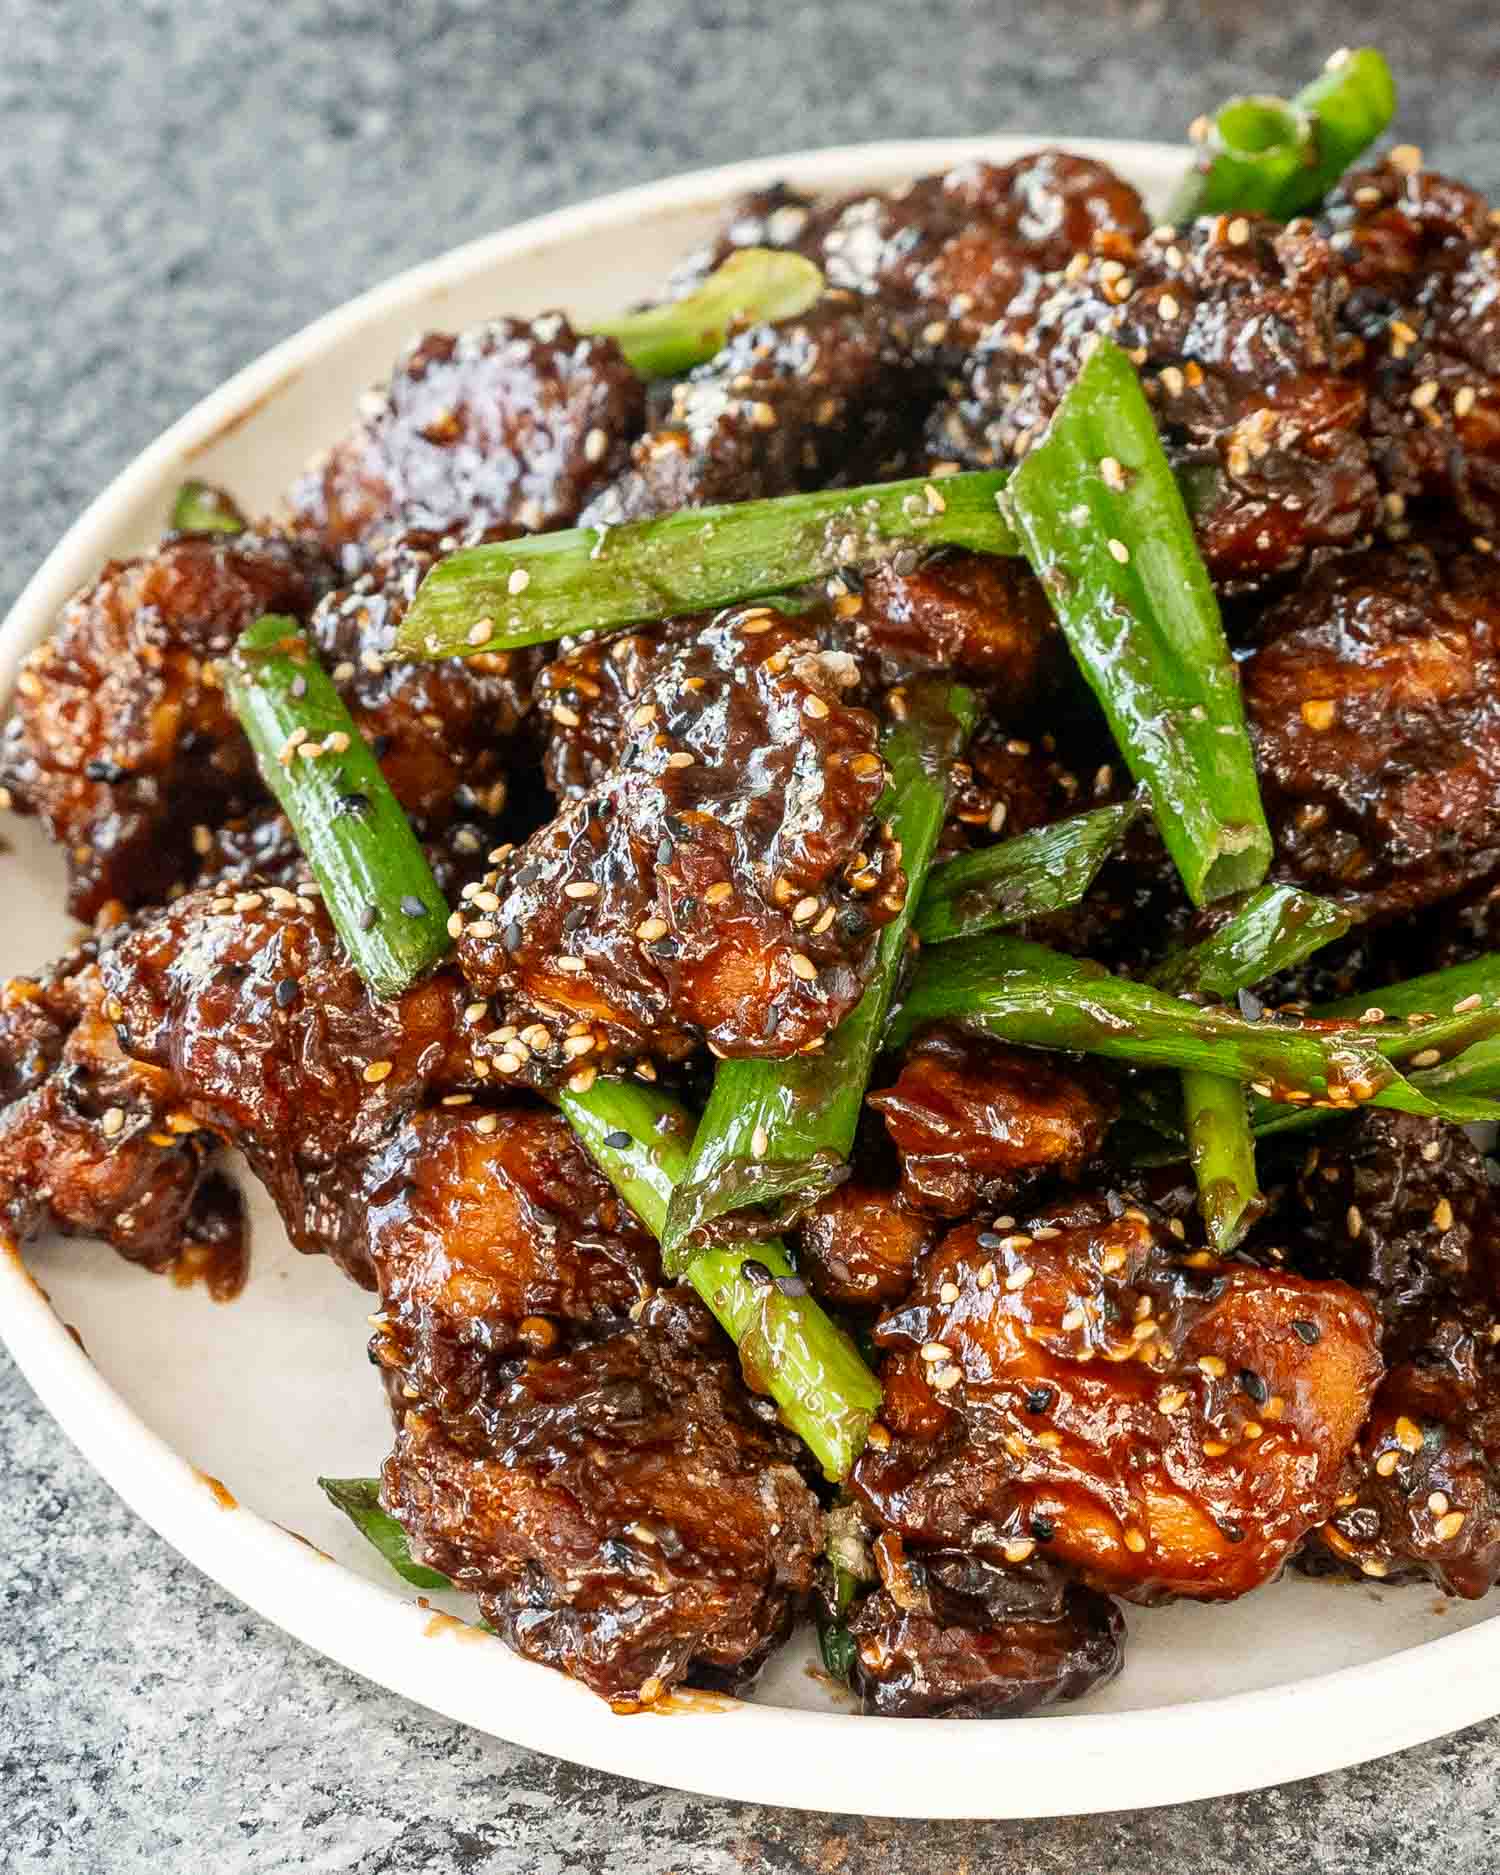 freshly made general tso's chicken garnished with green onions and sesame seeds in a white plate.